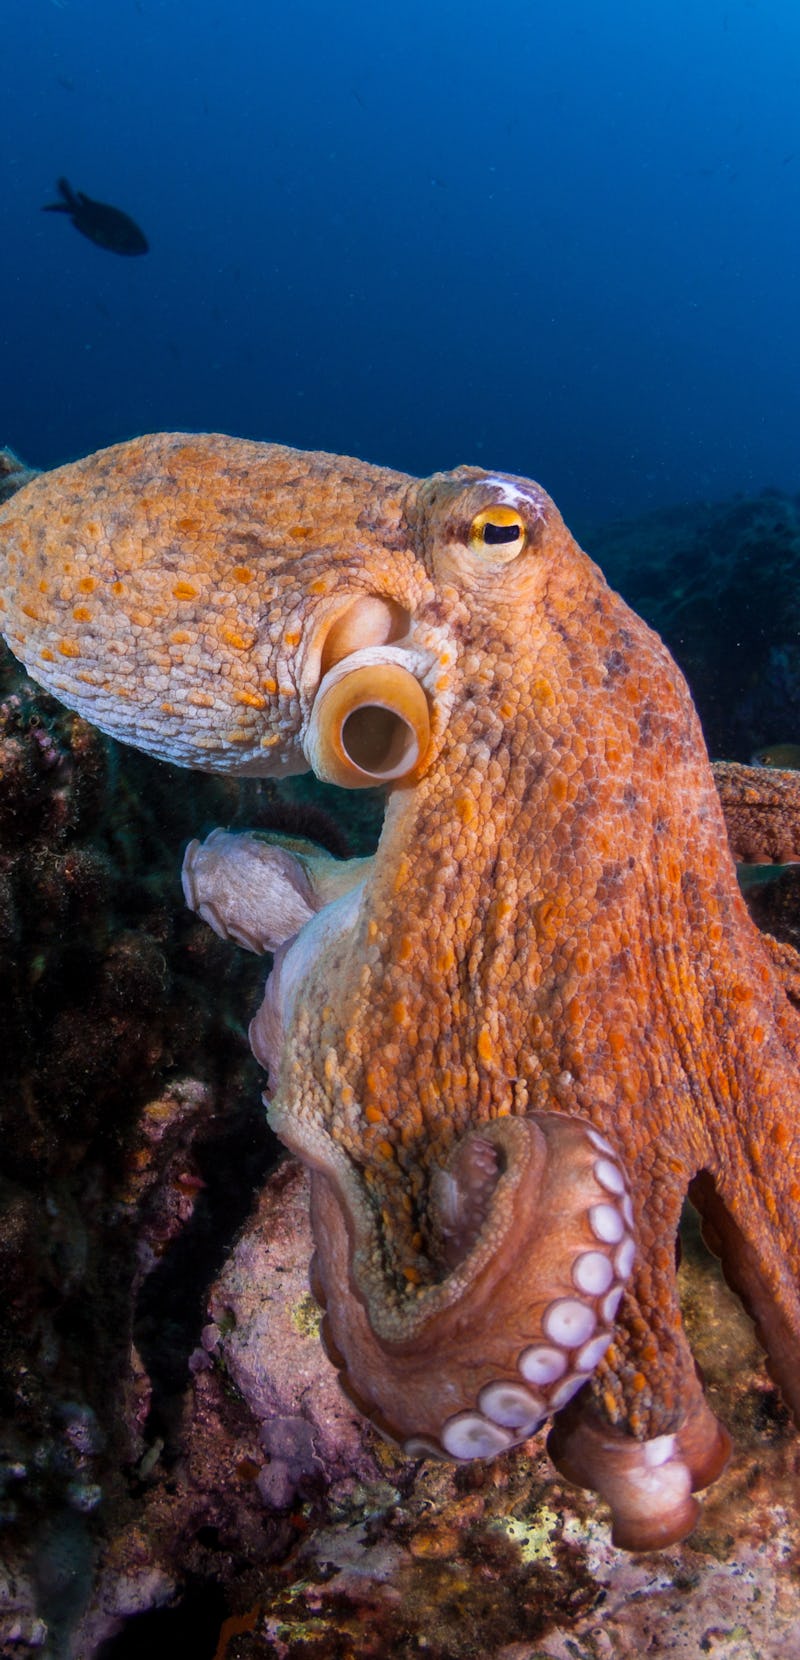 Close-up of a common octopus (Octopus vulgaris)